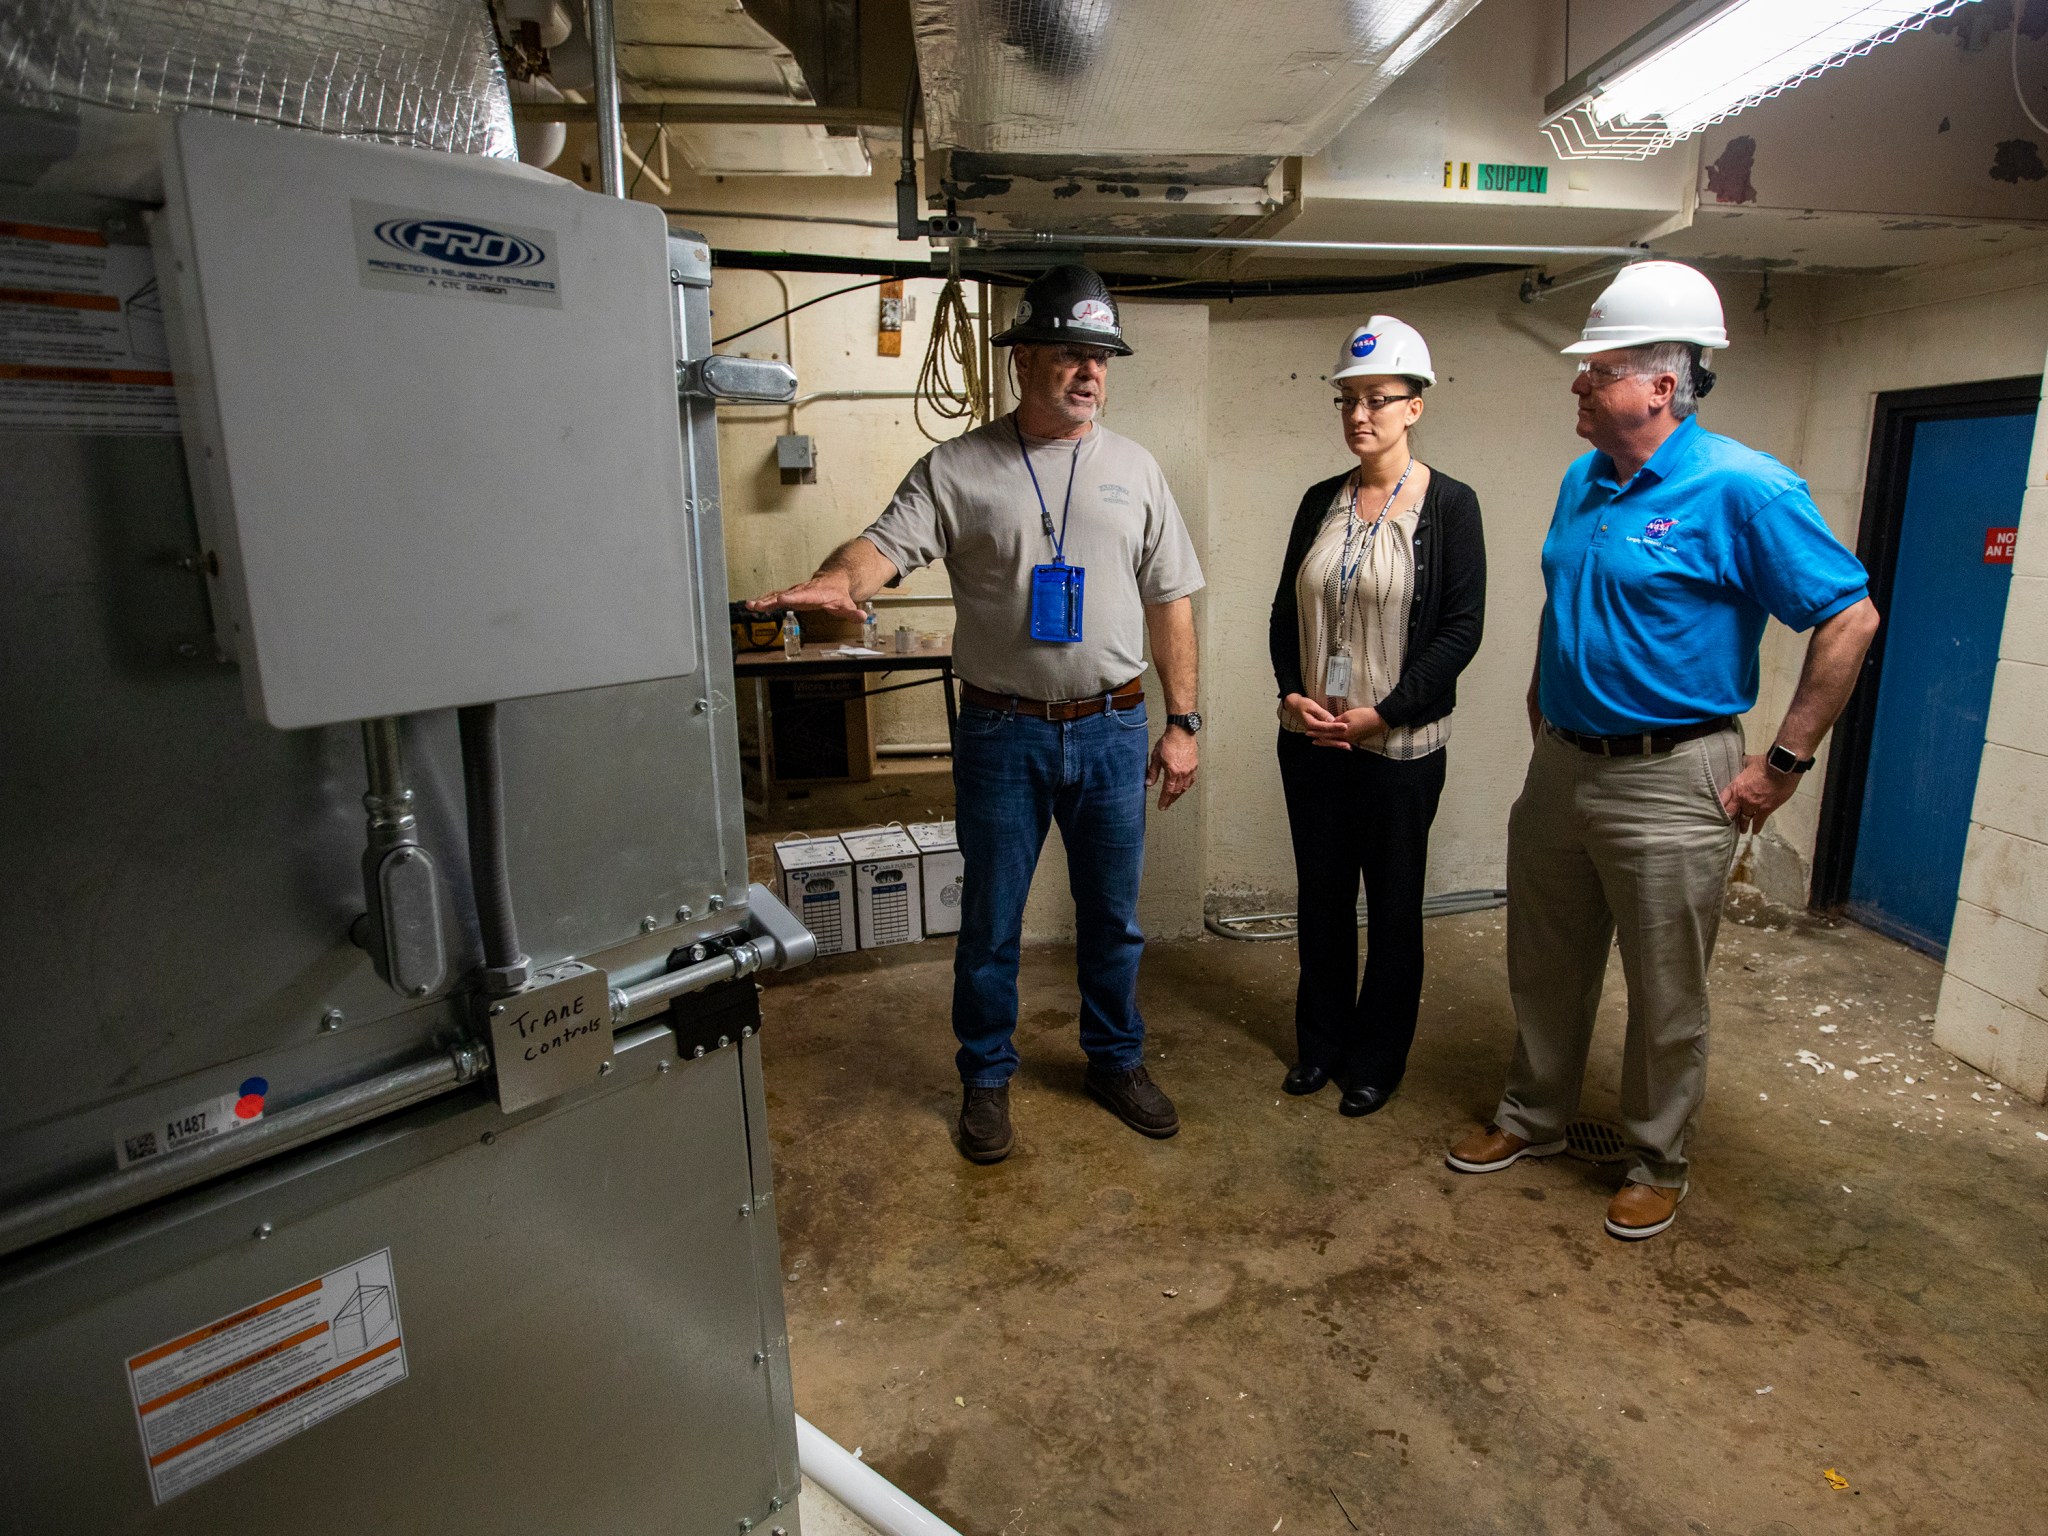 Jeff Gibson, left, Alicia Kelly-Eslinger, center, and Robert Betts look over a section of Langley's Acoustics Research Facility.